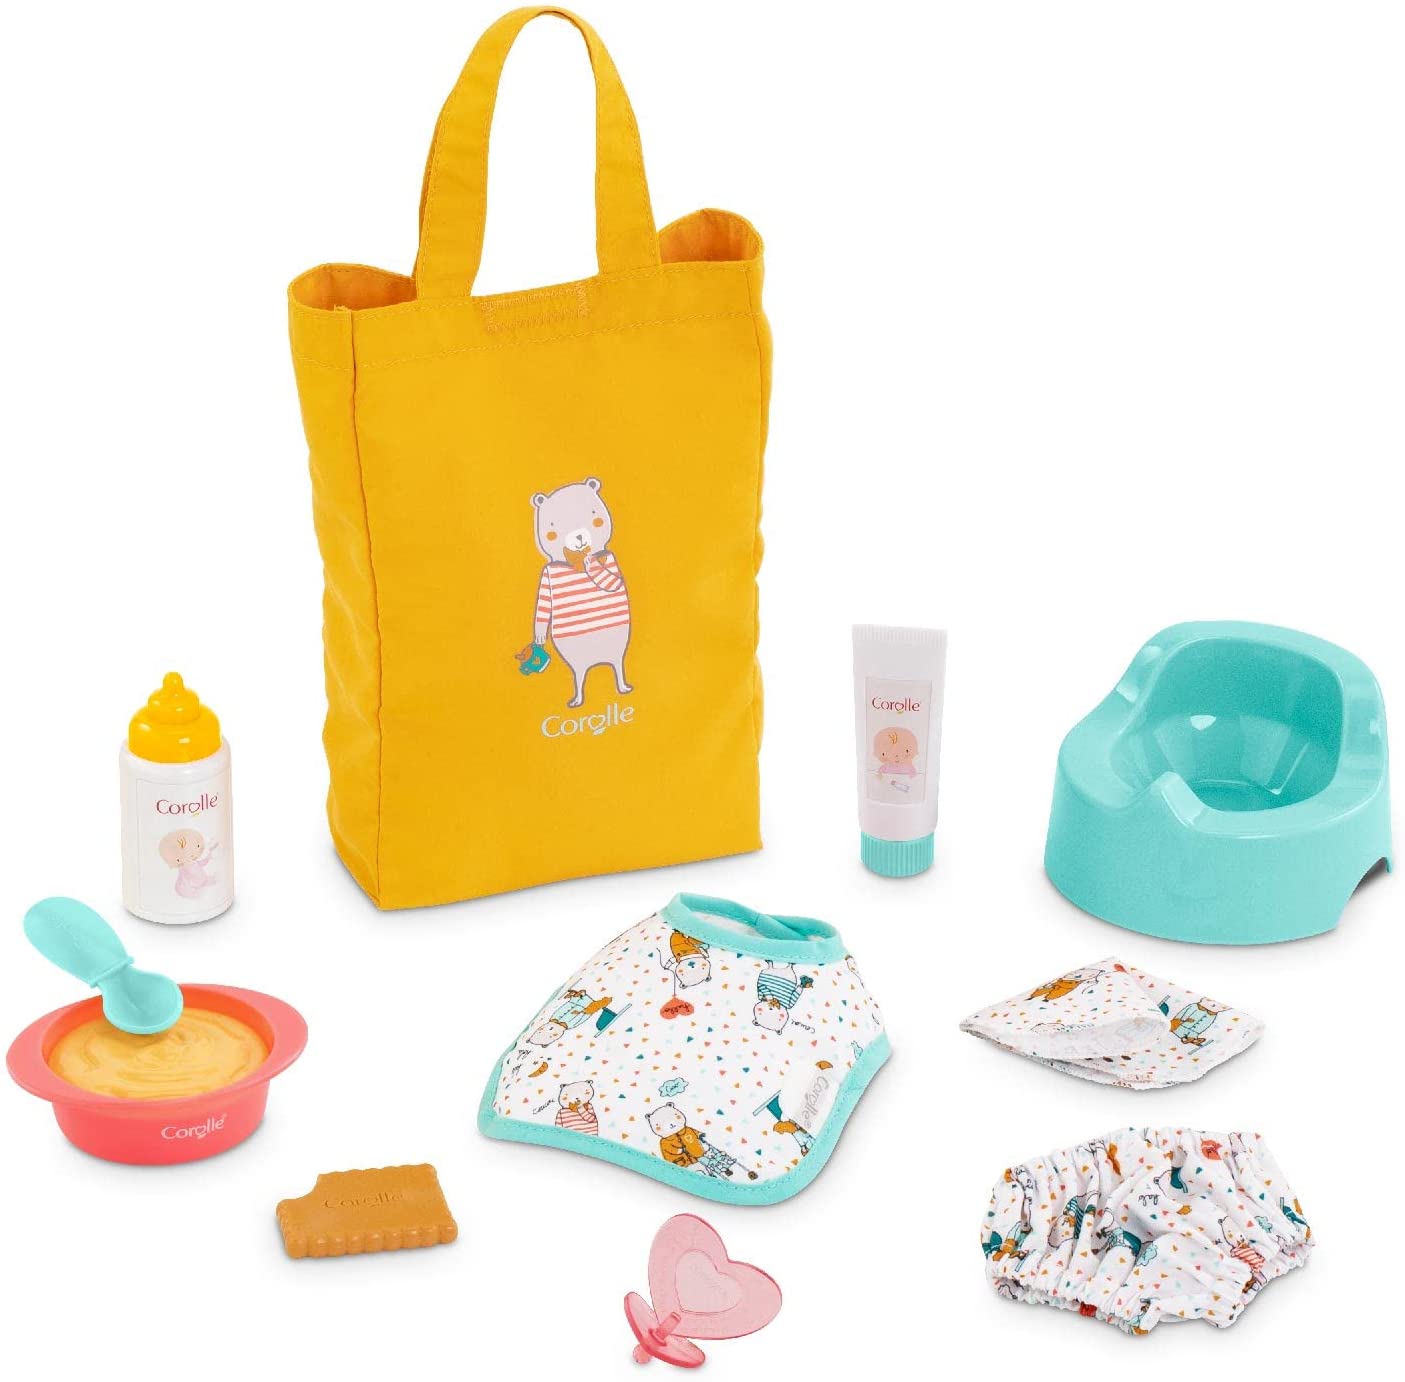 Corolle Large Baby Doll Accessories Set - 11-Piece Set for 12" Baby Dolls Includes Tote Bag, Bottle, Bib, Diaper, Potty, Pacifier and More,110770